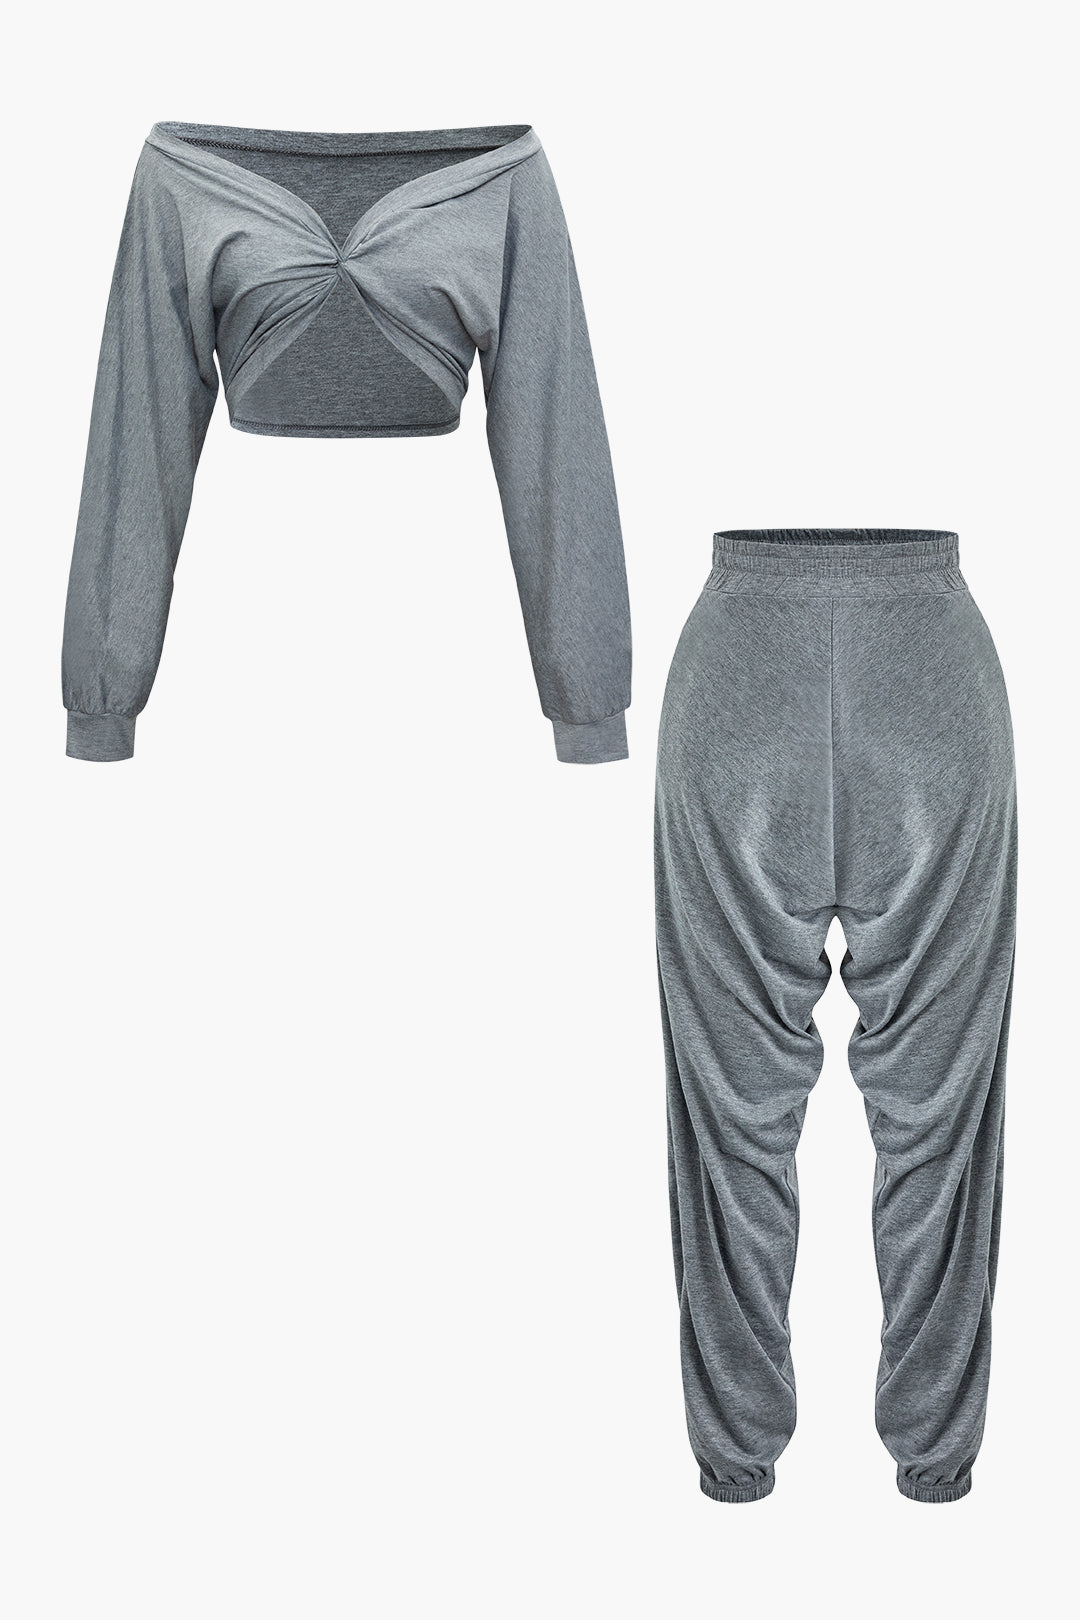 V-neck Twist Front Long Sleeve Top And High Waist Sweatpants Set